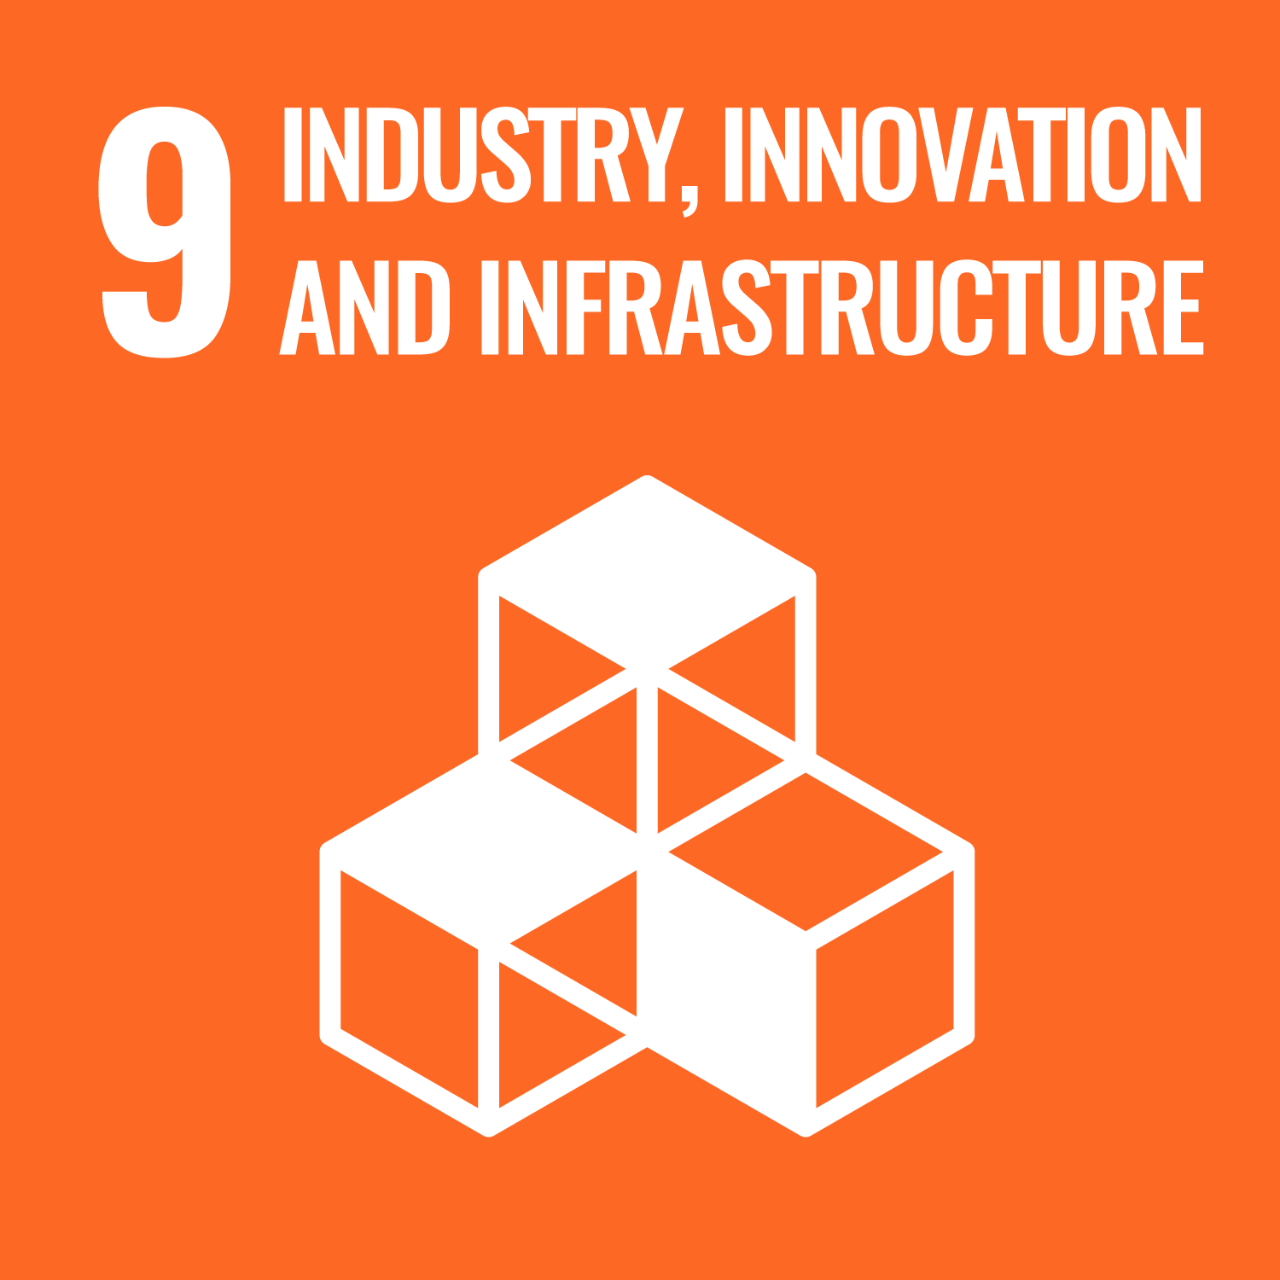 Orange icon with graphic of blocks to represent UNSDG Goal 9: Industry, Innovation and Infrastructure.